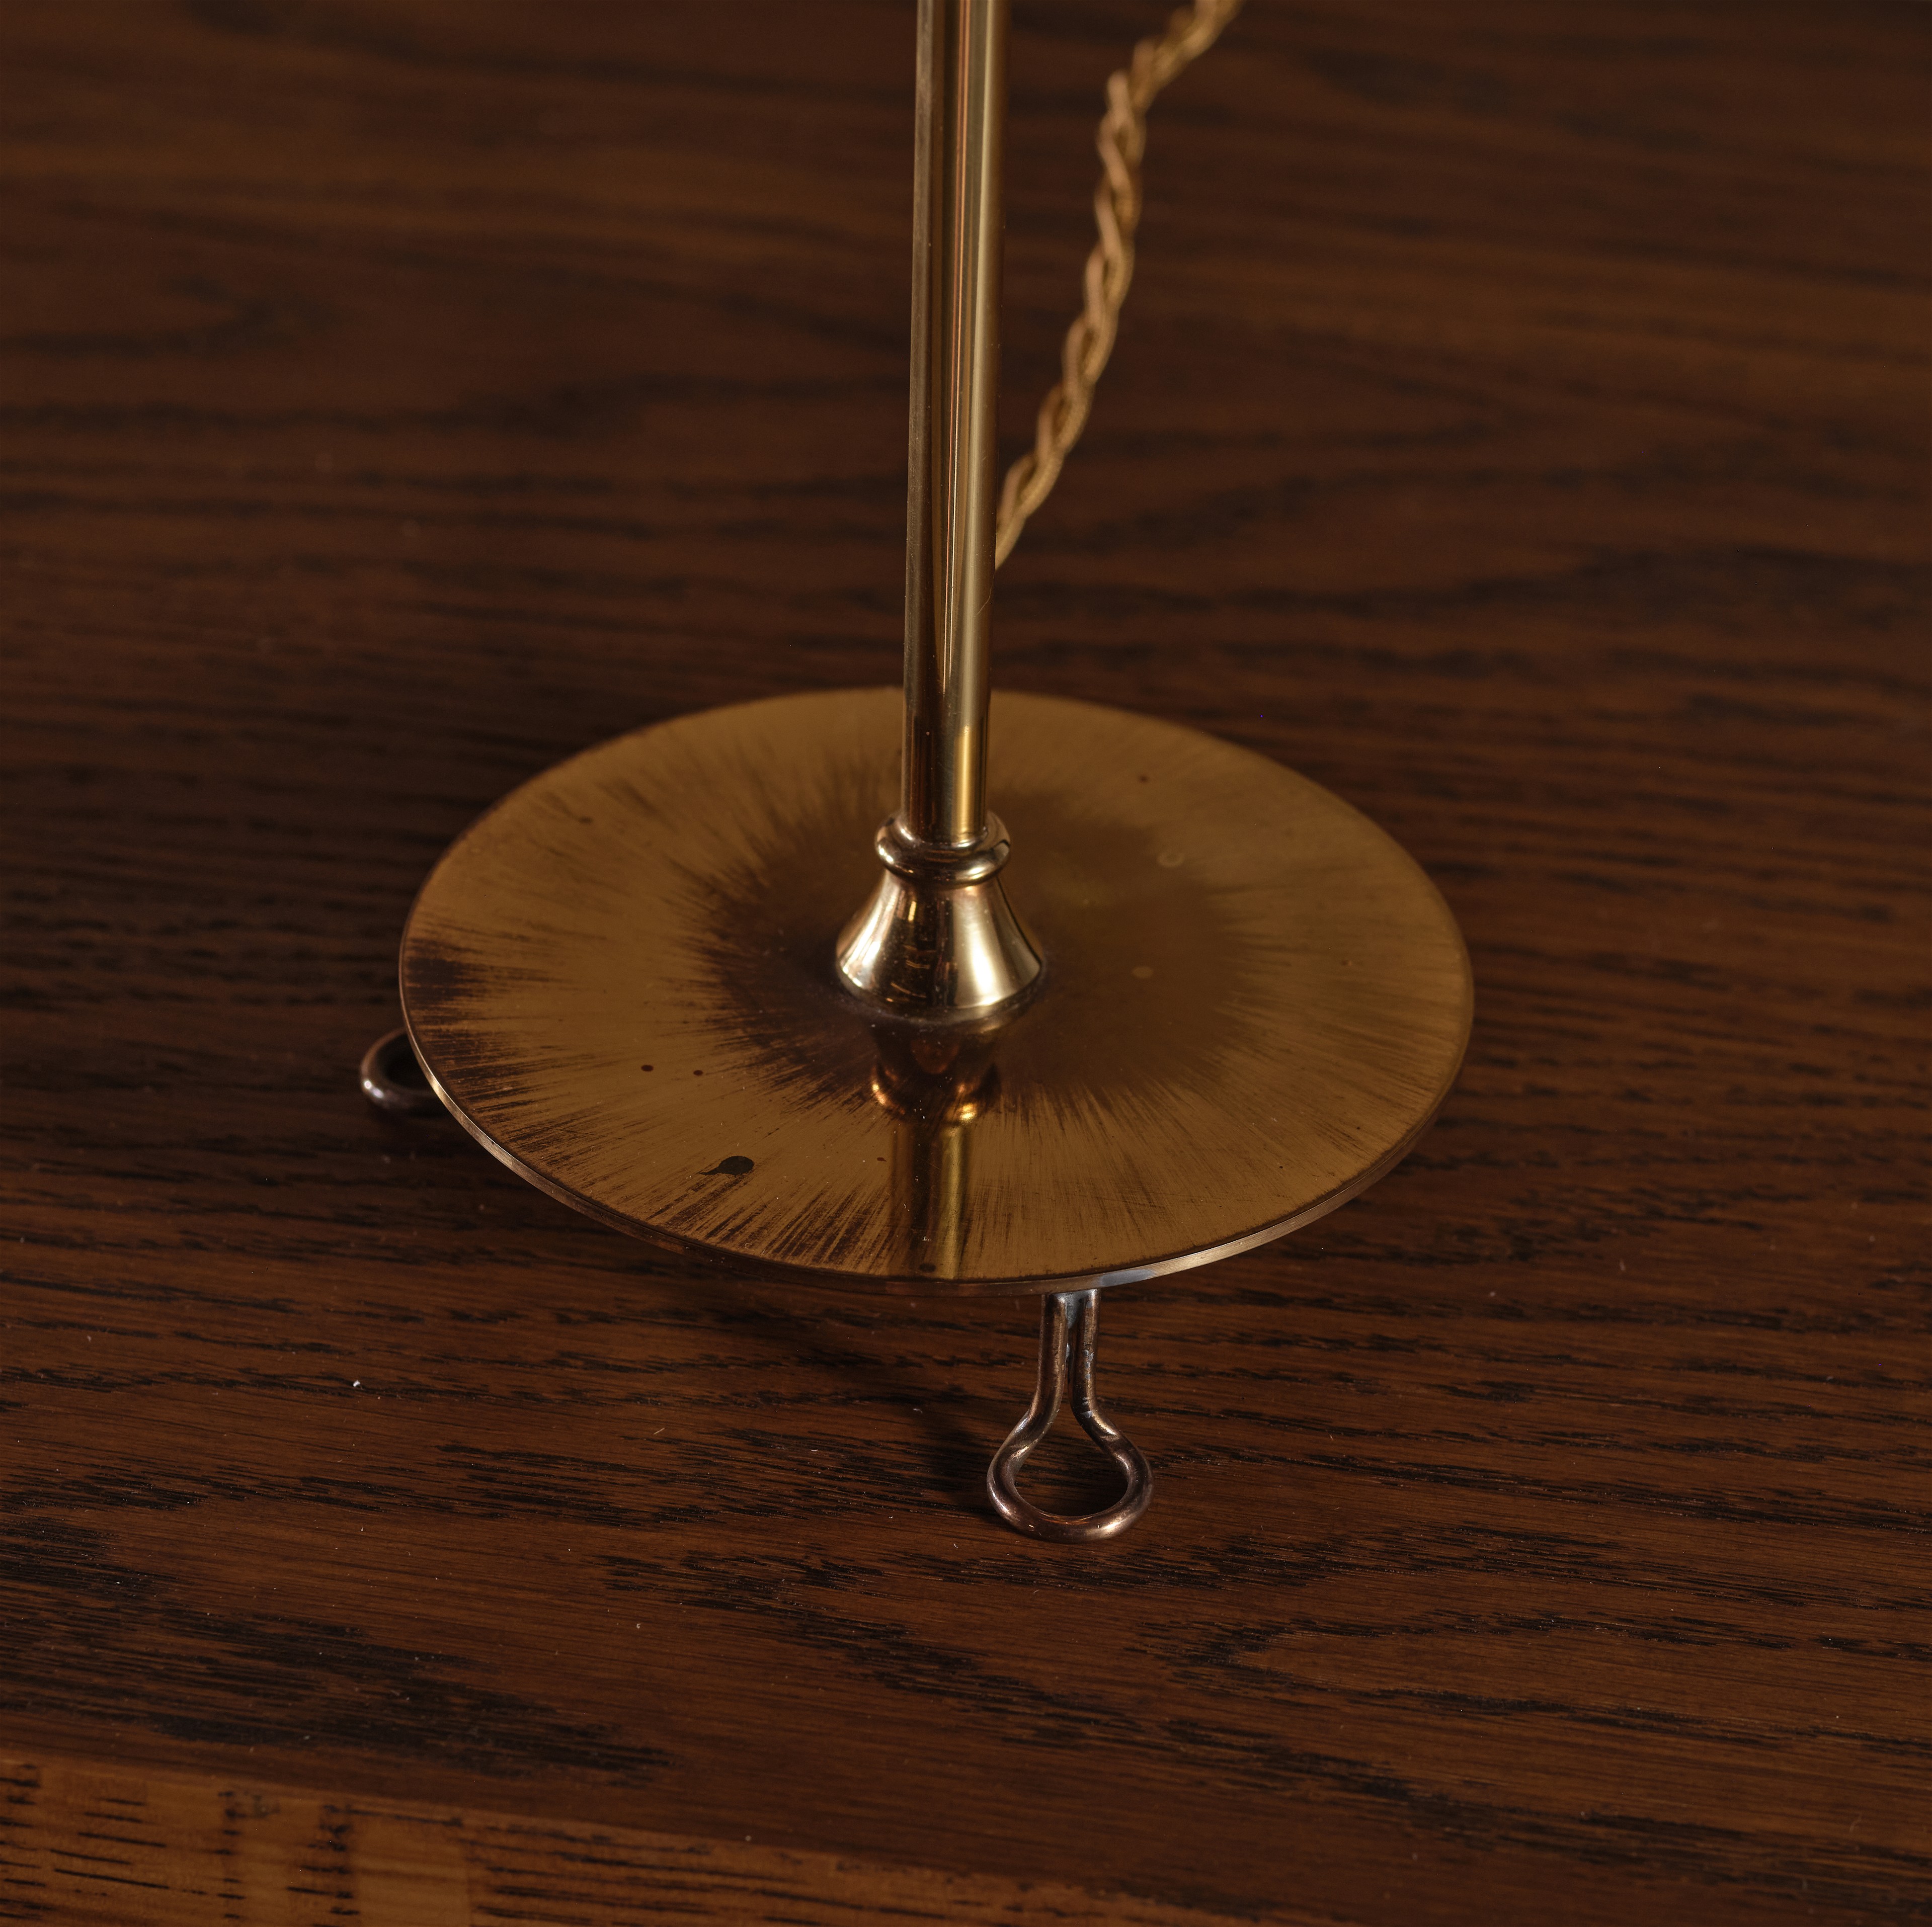 a close up of a clock on a wooden table